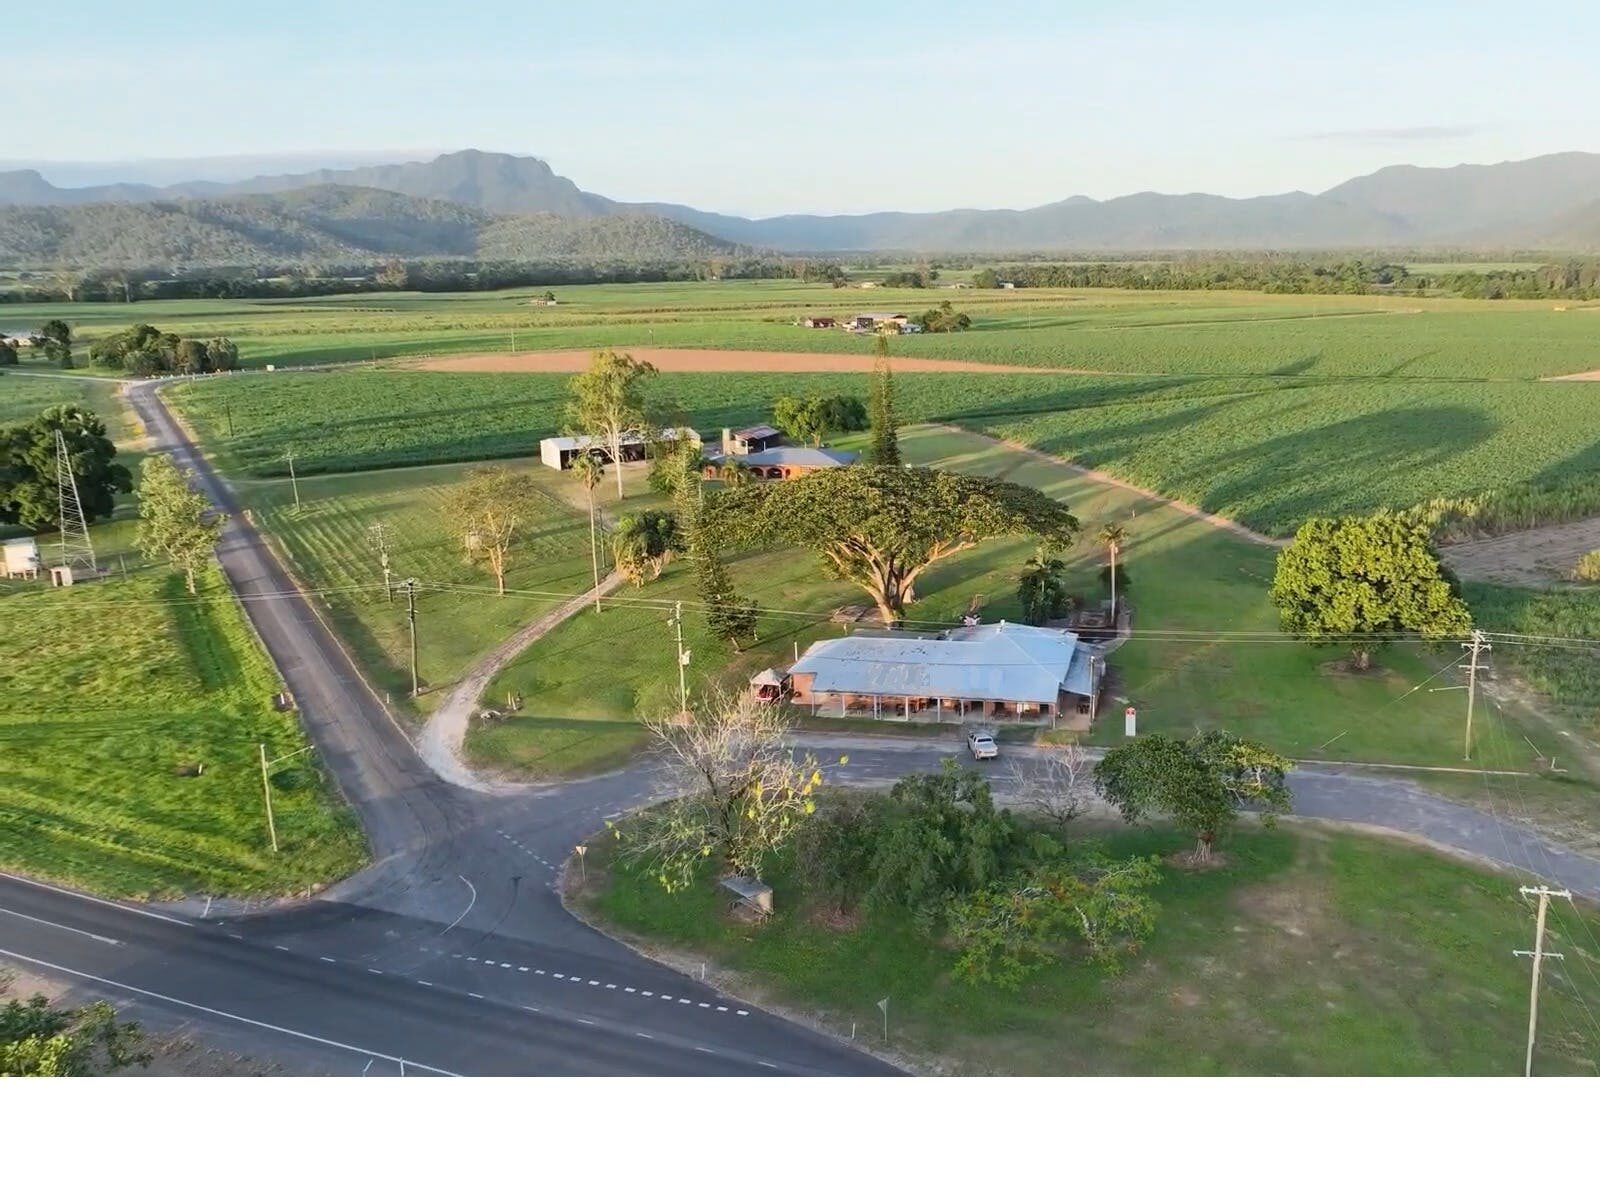 Cloakey's, Warrgamay Country, North Queensland